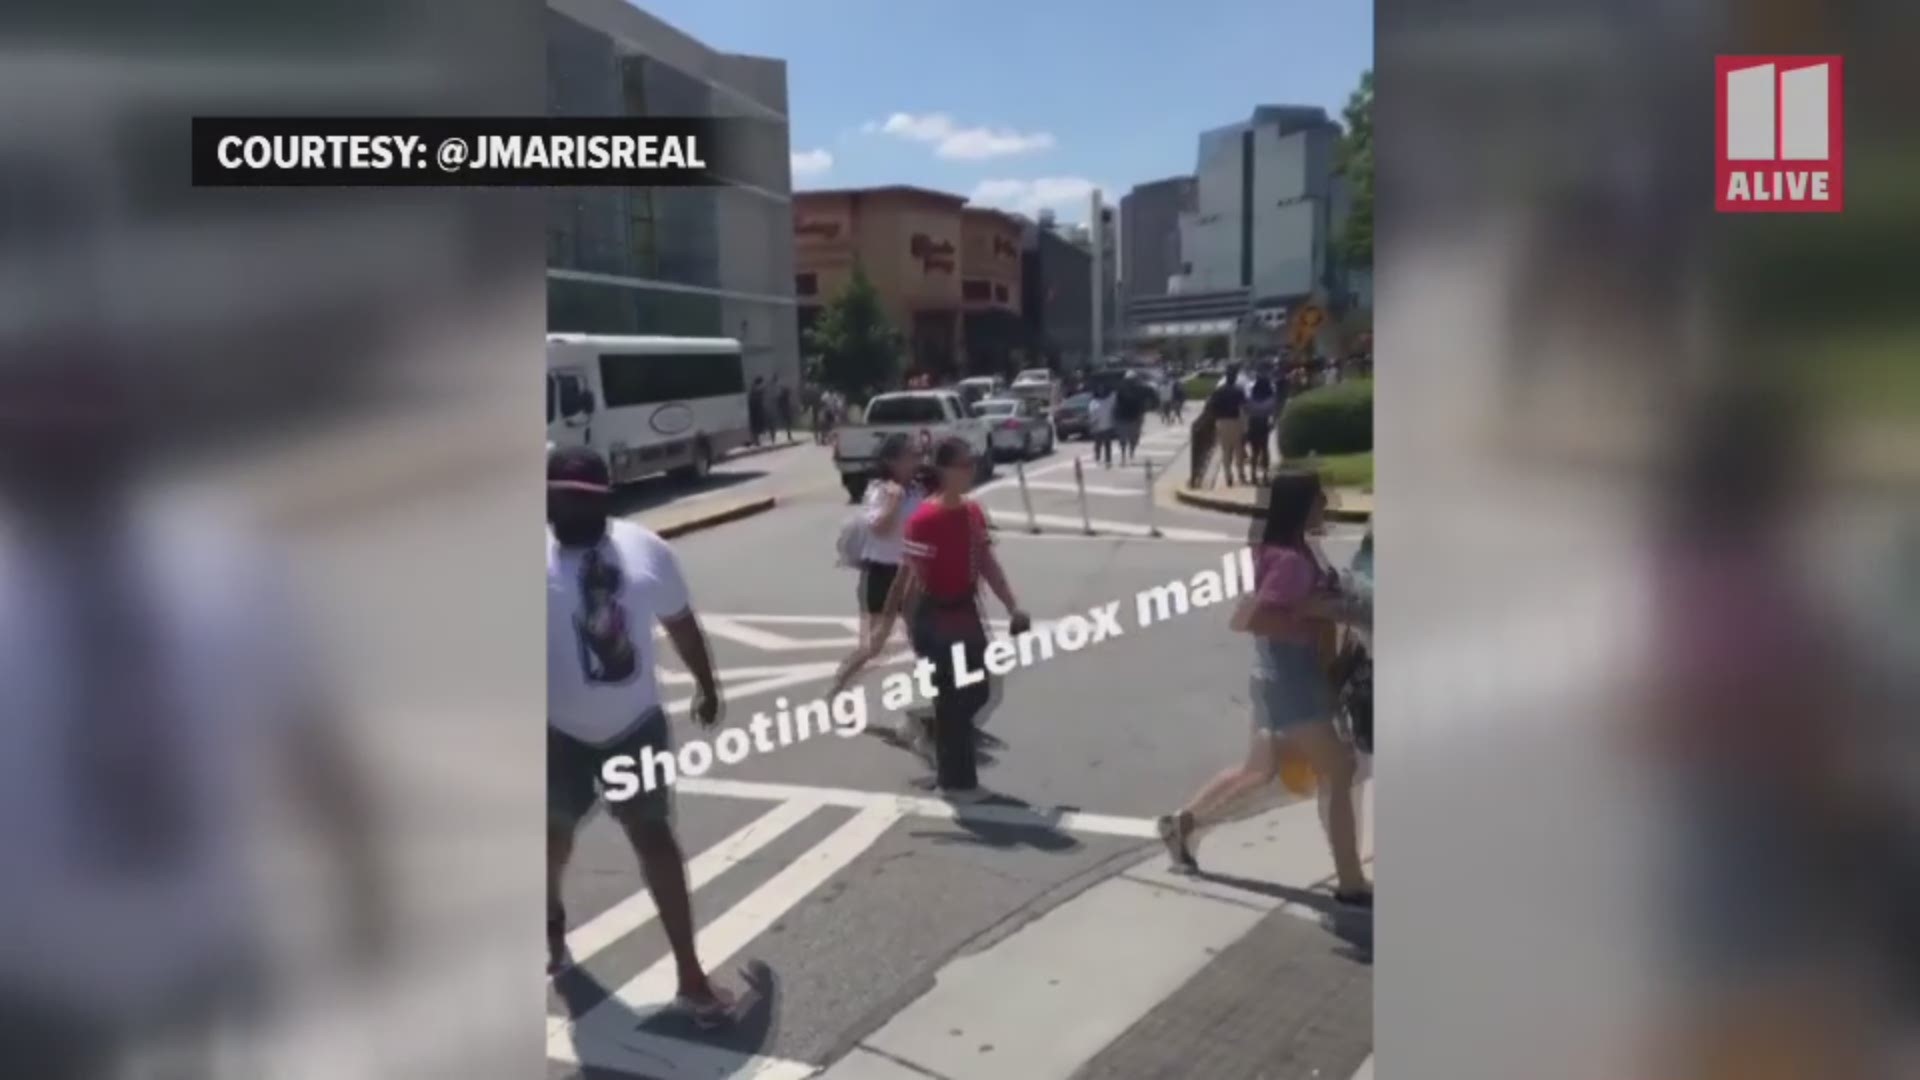 Atlanta Police said a fight in the mall was originally reported as shots fired which was later found to be false. No injuries have been reported.